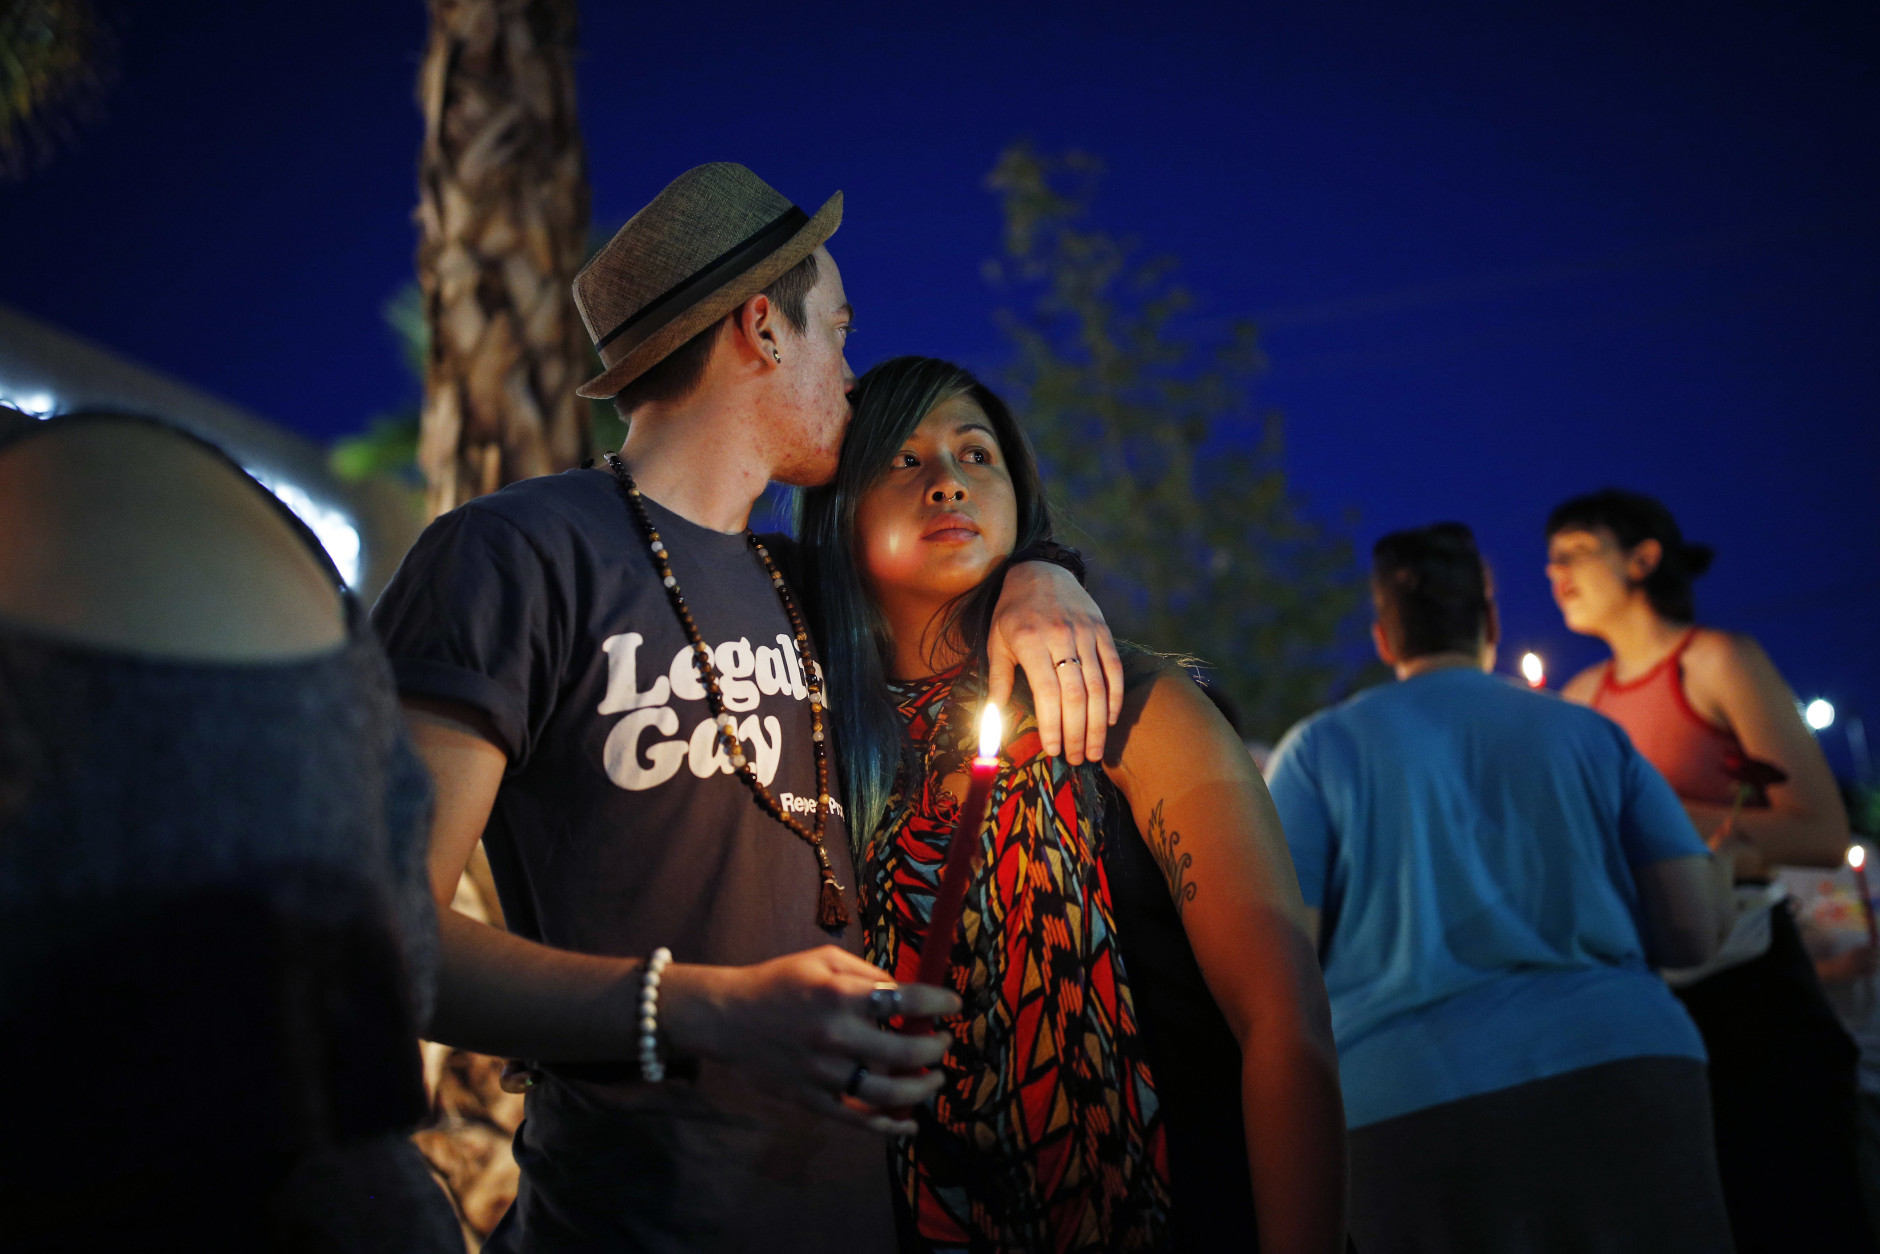 Two people embrace during a vigil at The Center, a community center for the LGBT community, Sunday, June 12, 2016, in Las Vegas. The vigil was for the victims of the Pulse nightclub shooting in Orlando. (AP Photo/John Locher)